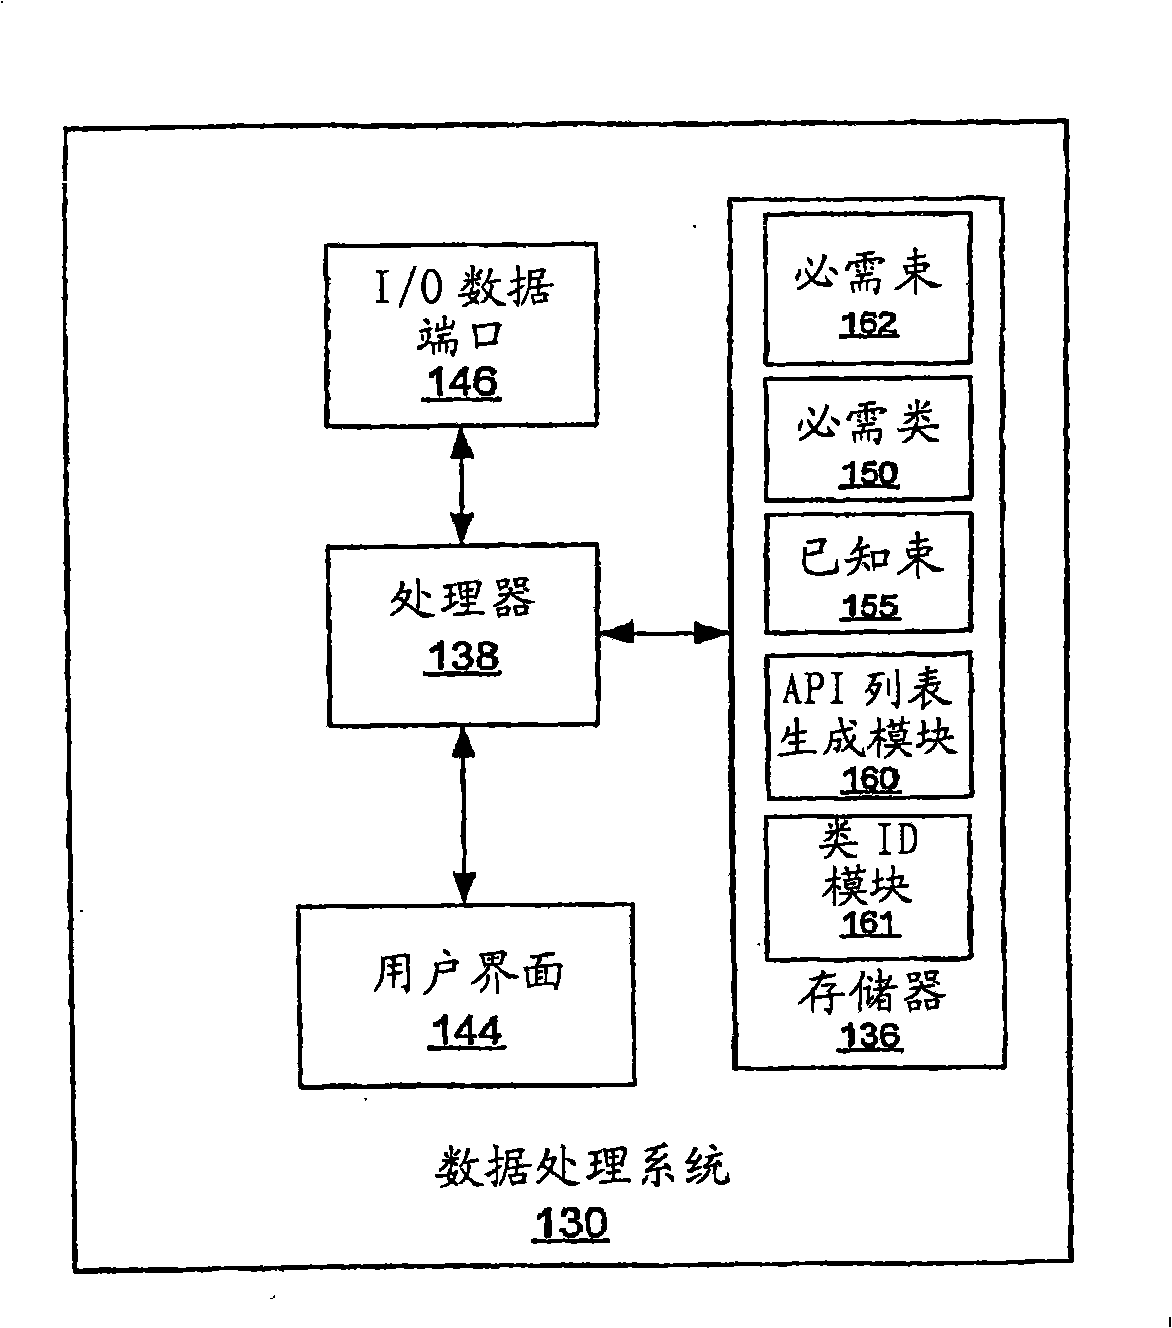 Methods, systems and computer program products for downloading a Java application based on identification of supported classes